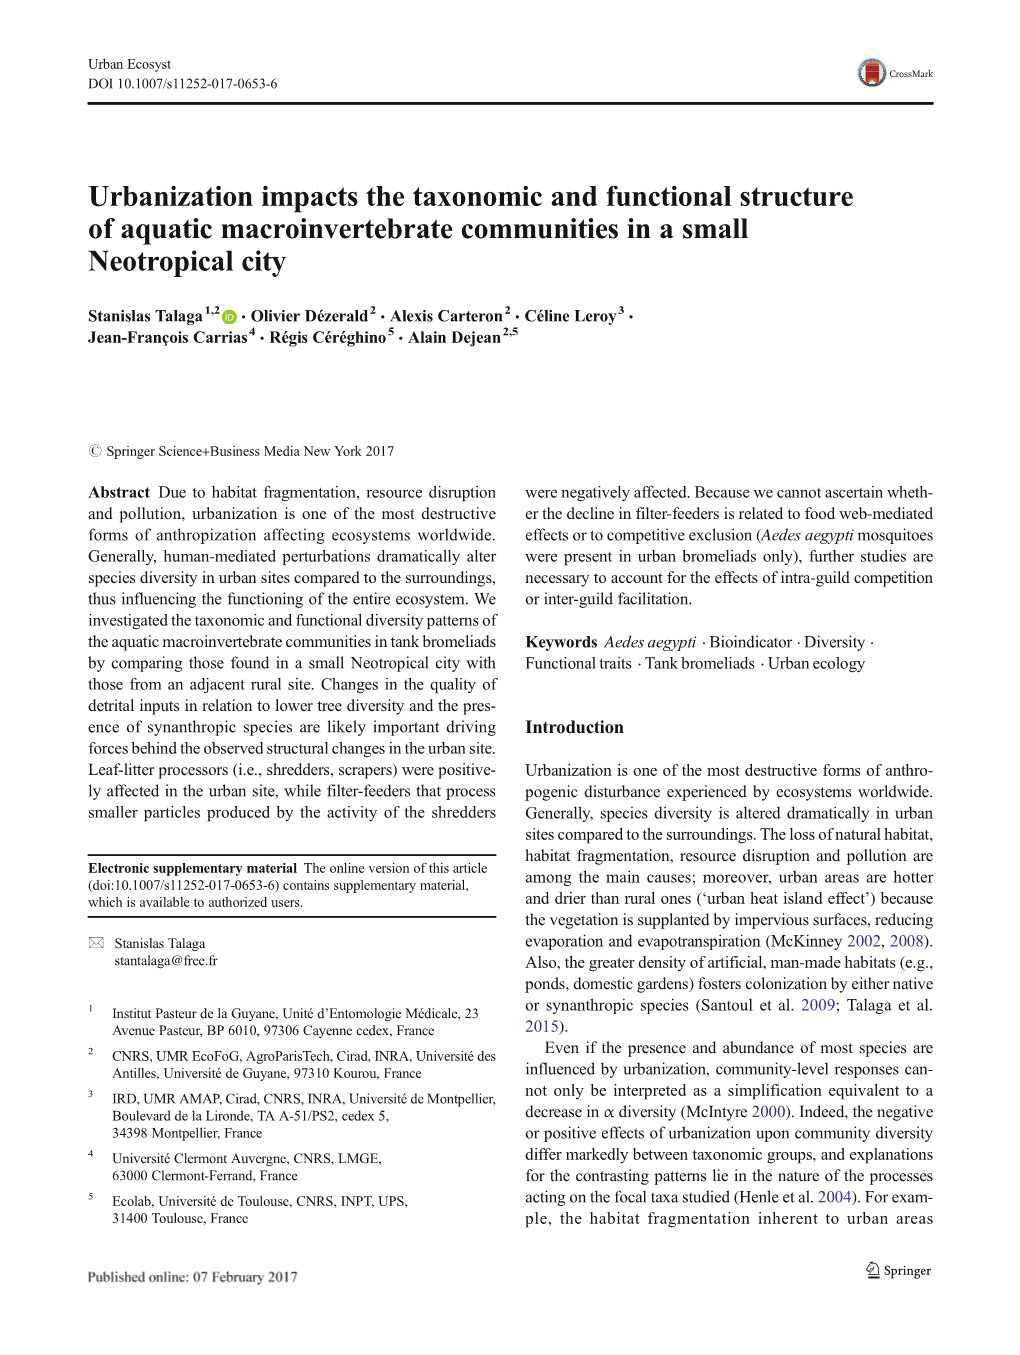 Urbanization Impacts the Taxonomic and Functional Structure of Aquatic Macroinvertebrate Communities in a Small Neotropical City